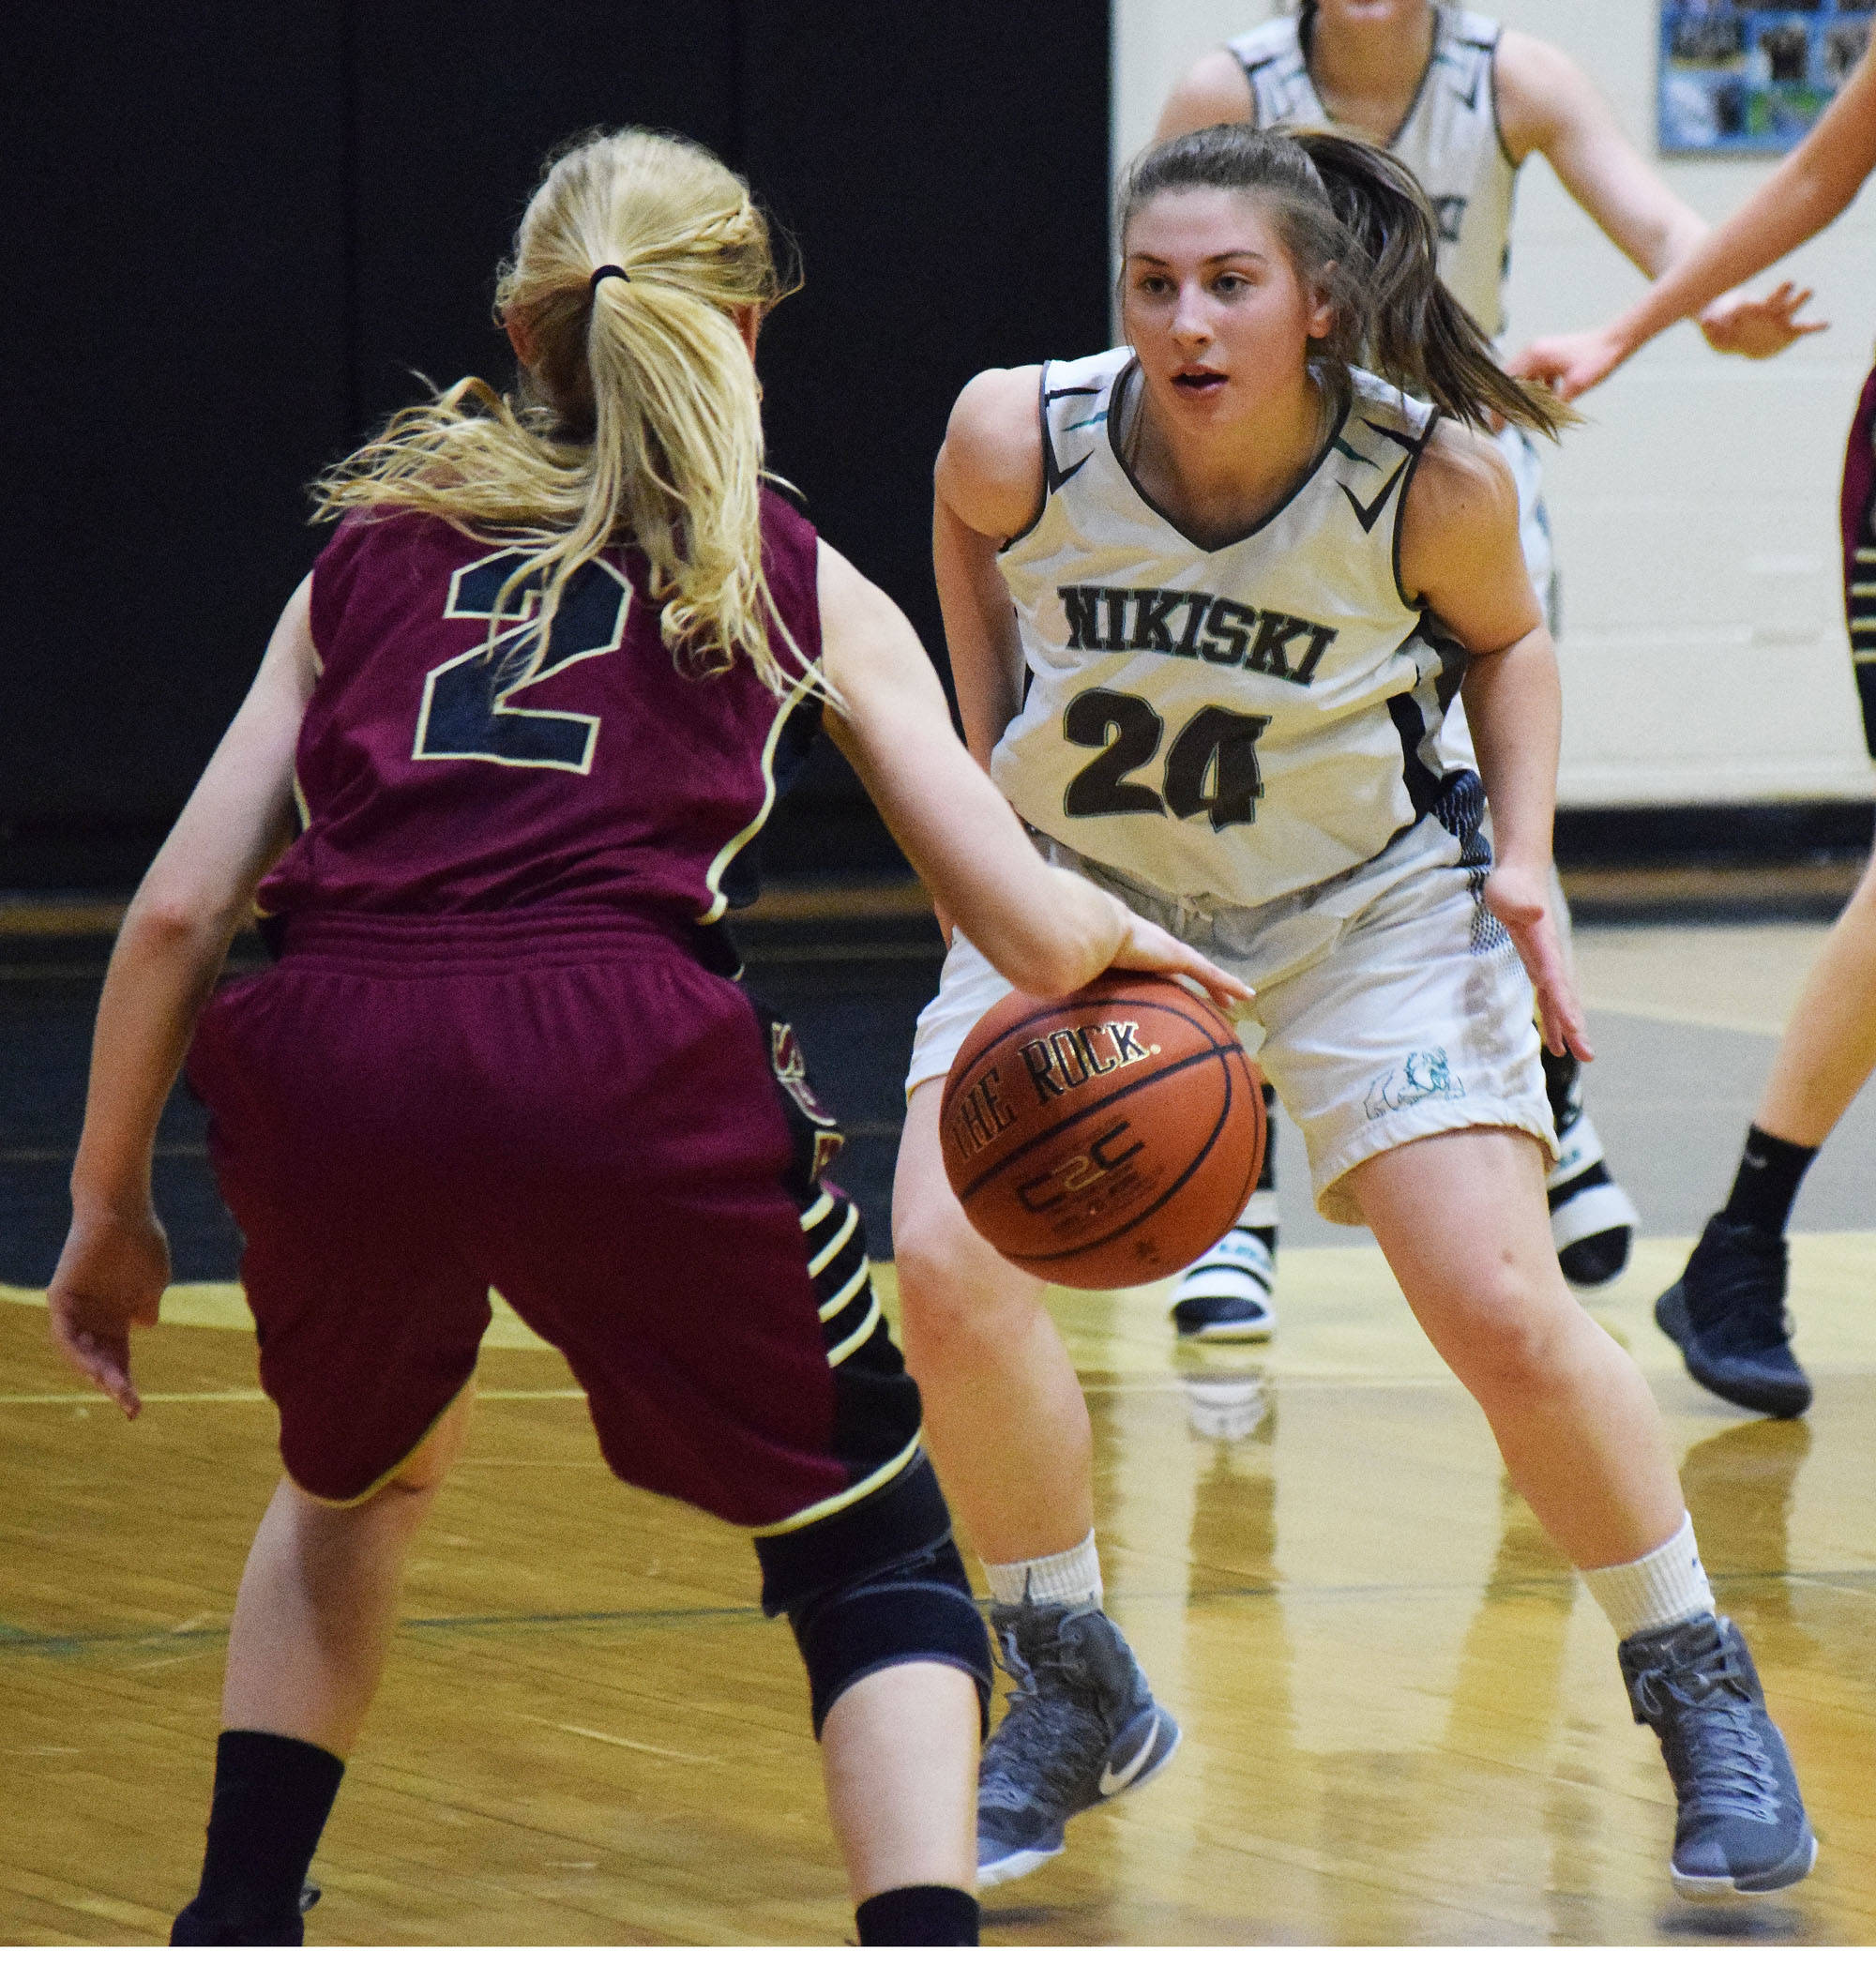 Nikiski’s Kelsey Clark (24) eyes Grace Christian’s Annie VanderWeide in Friday’s semifinal at the Southcentral Conference basketball tournament at Nikiski High School. (Photo by Joey Klecka/Peninsula Clarion)